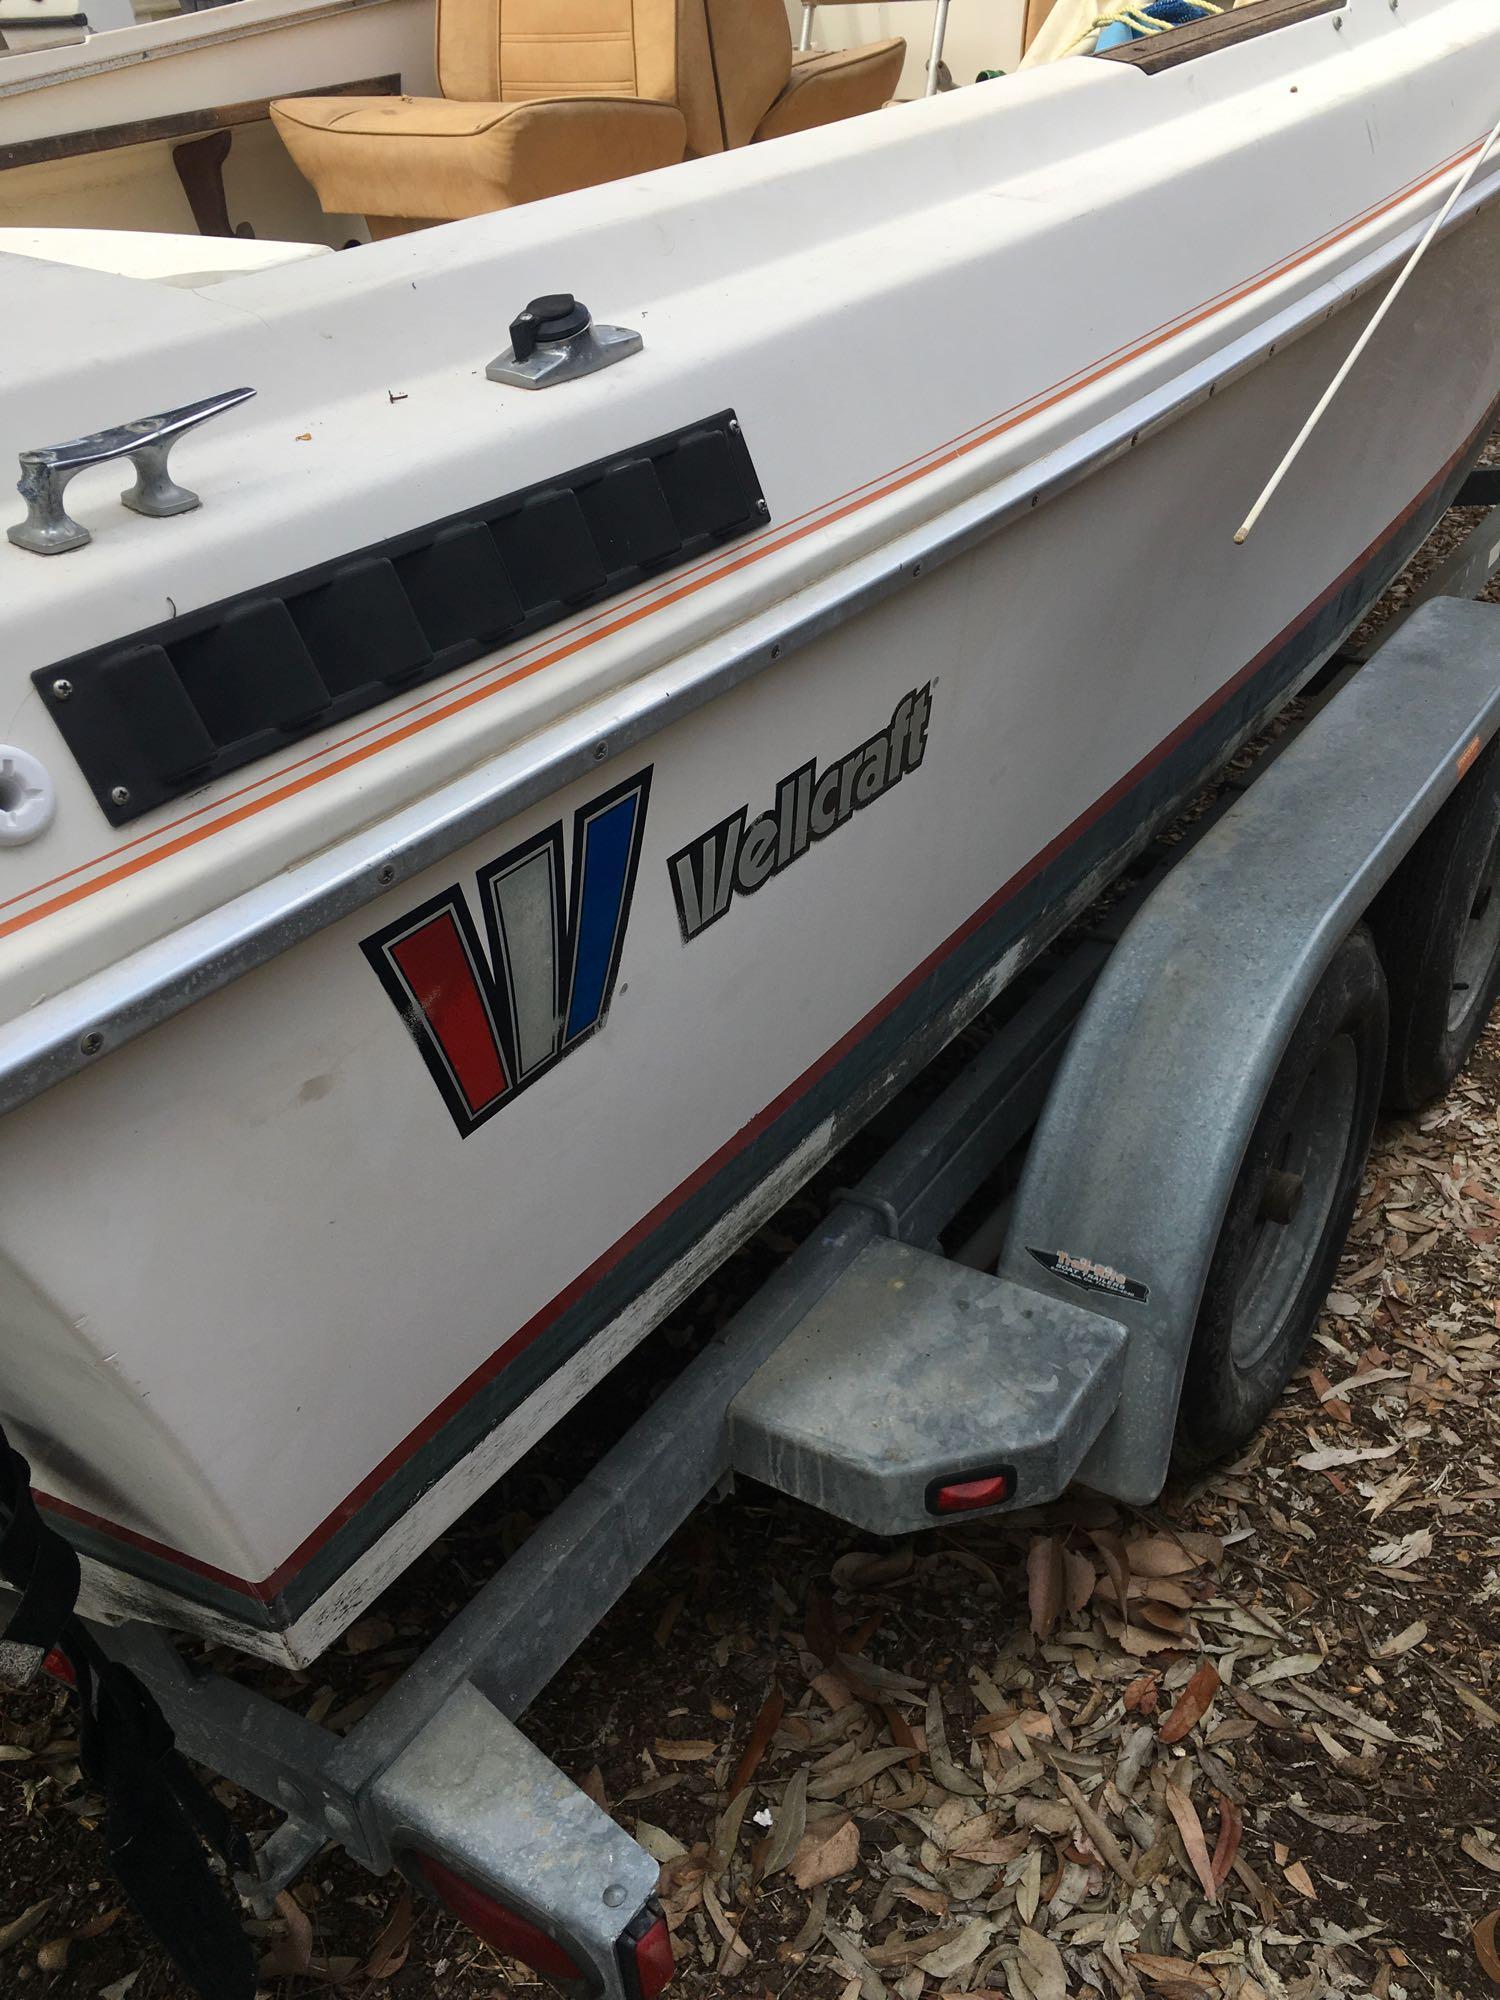 1981 Wellcraft V-20 Step-Lift 20' Boat, MOTOR TURNS OVER HAS BAD GAS, with 1991 Trail-Rite trailer.